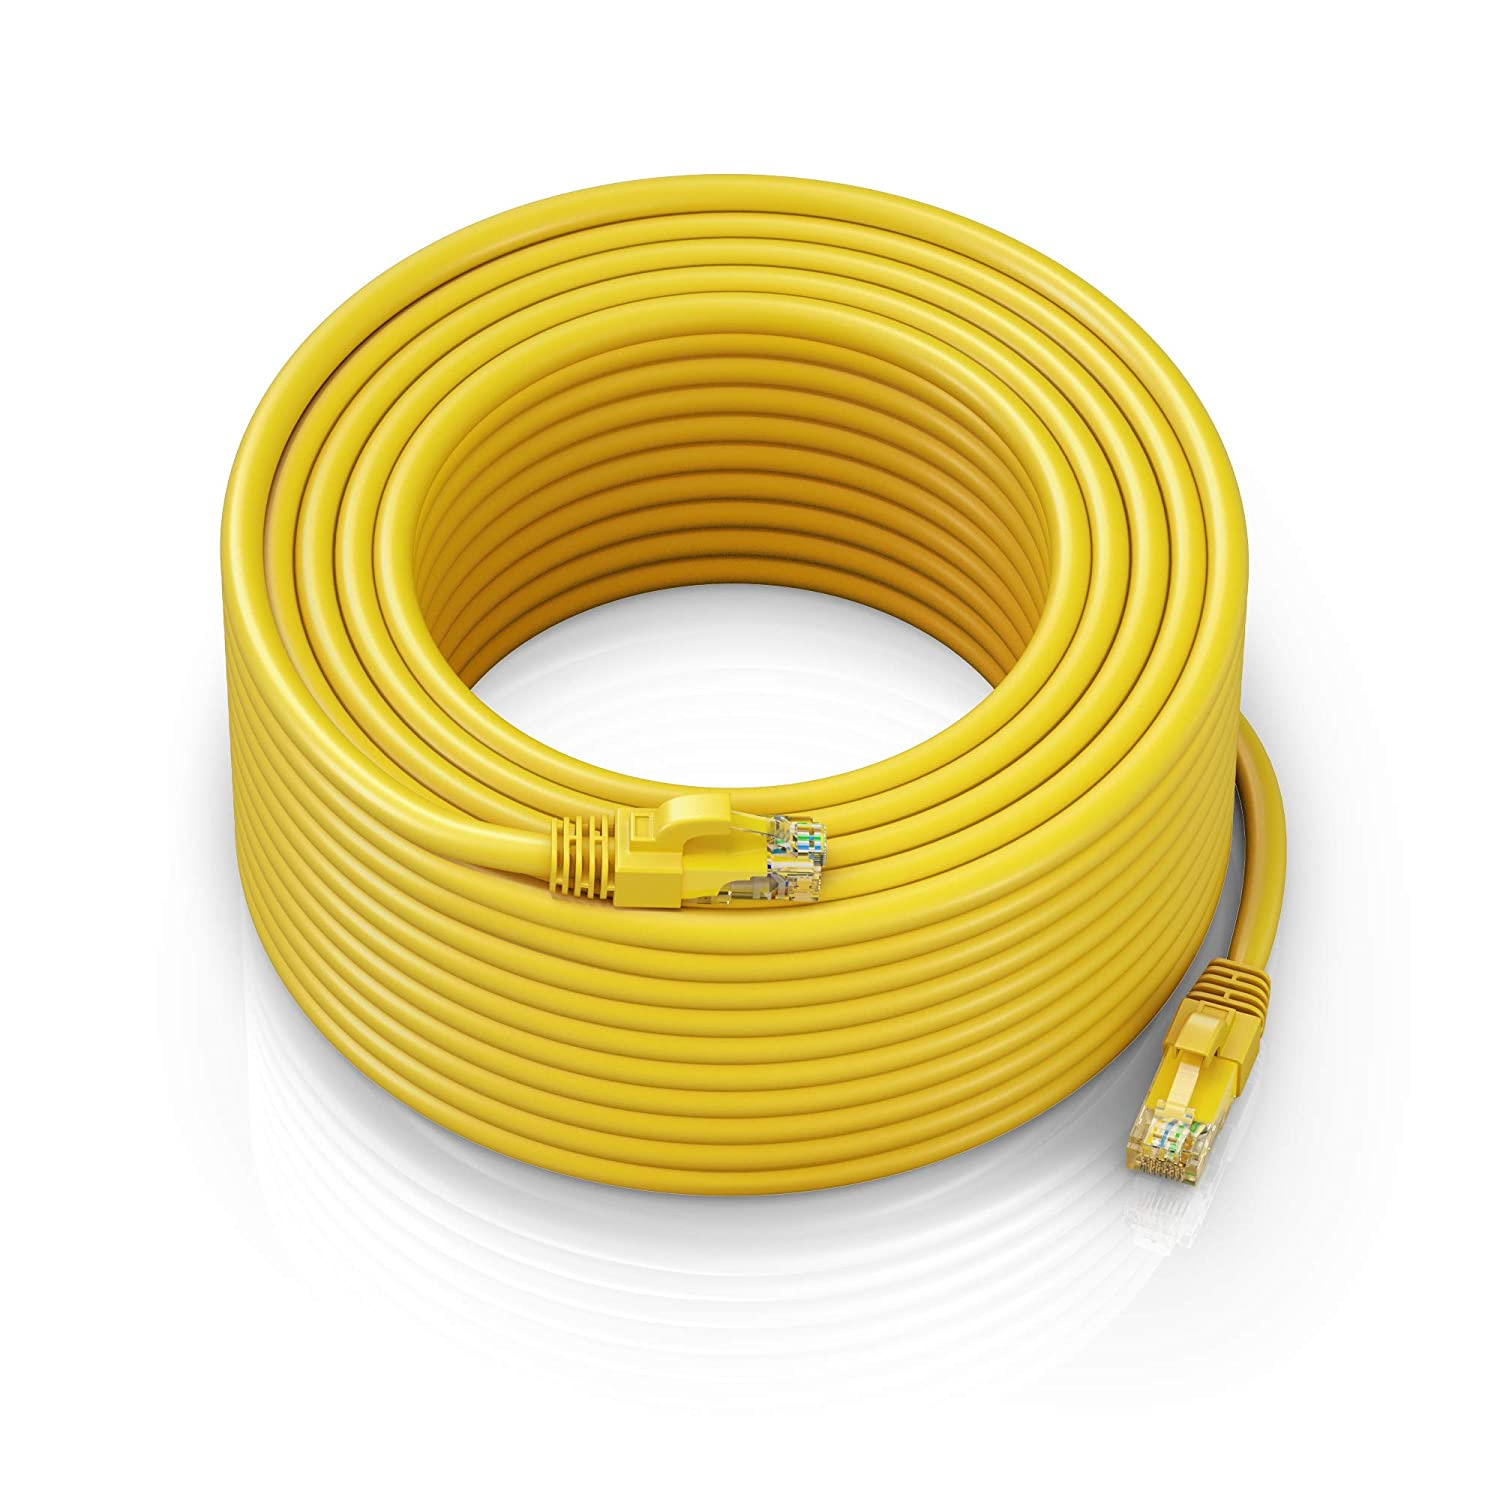 Cat 6 Ethernet Cable 300 Ft, Cat6 Cable, LAN Cable, Internet Cable and Network C